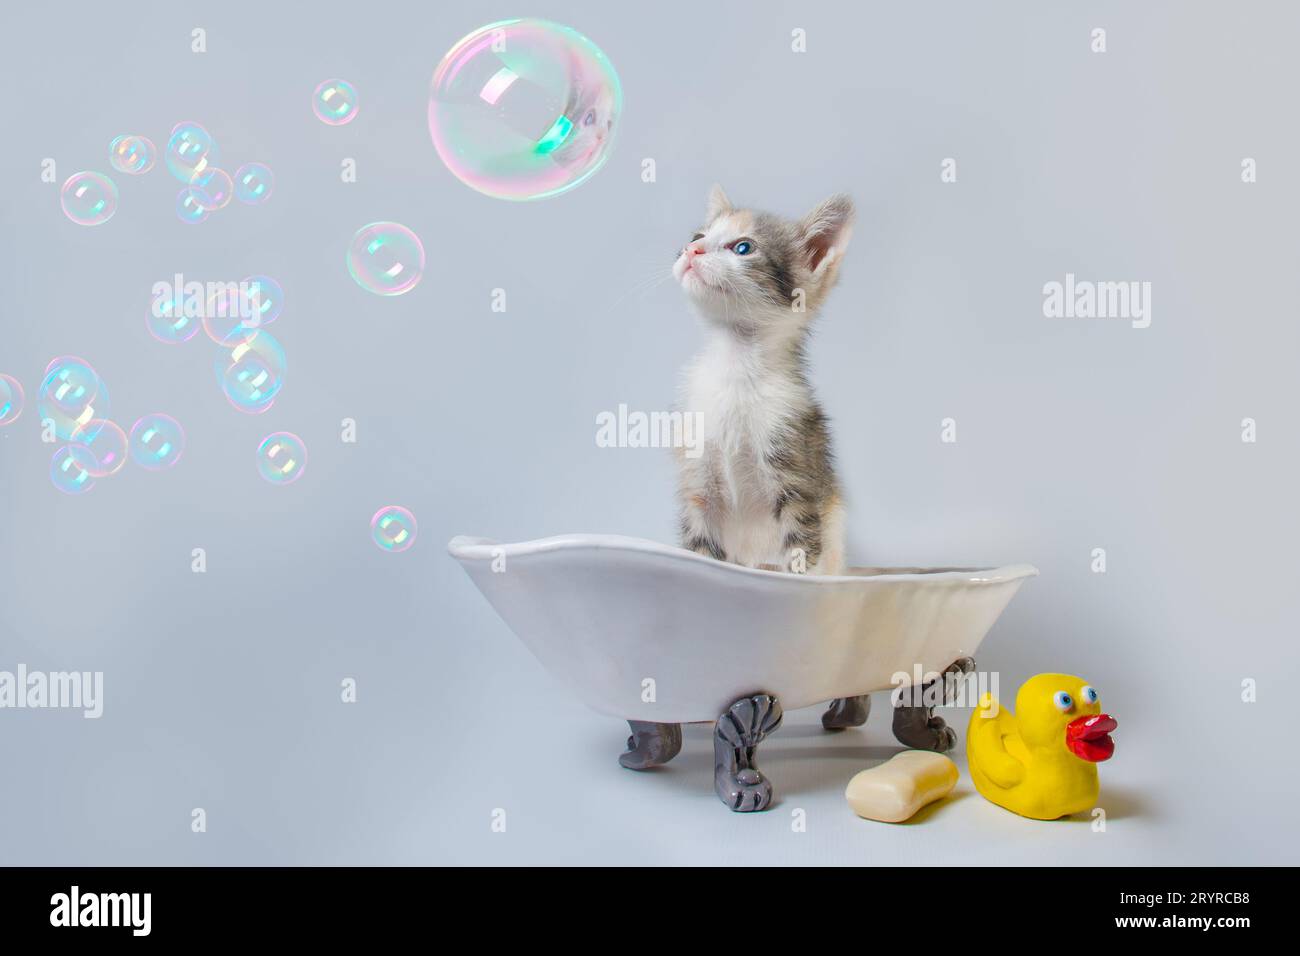 Tabby kitten sits in a toy bathtub next to a bar of soap and a yellow rubber duckie Stock Photo